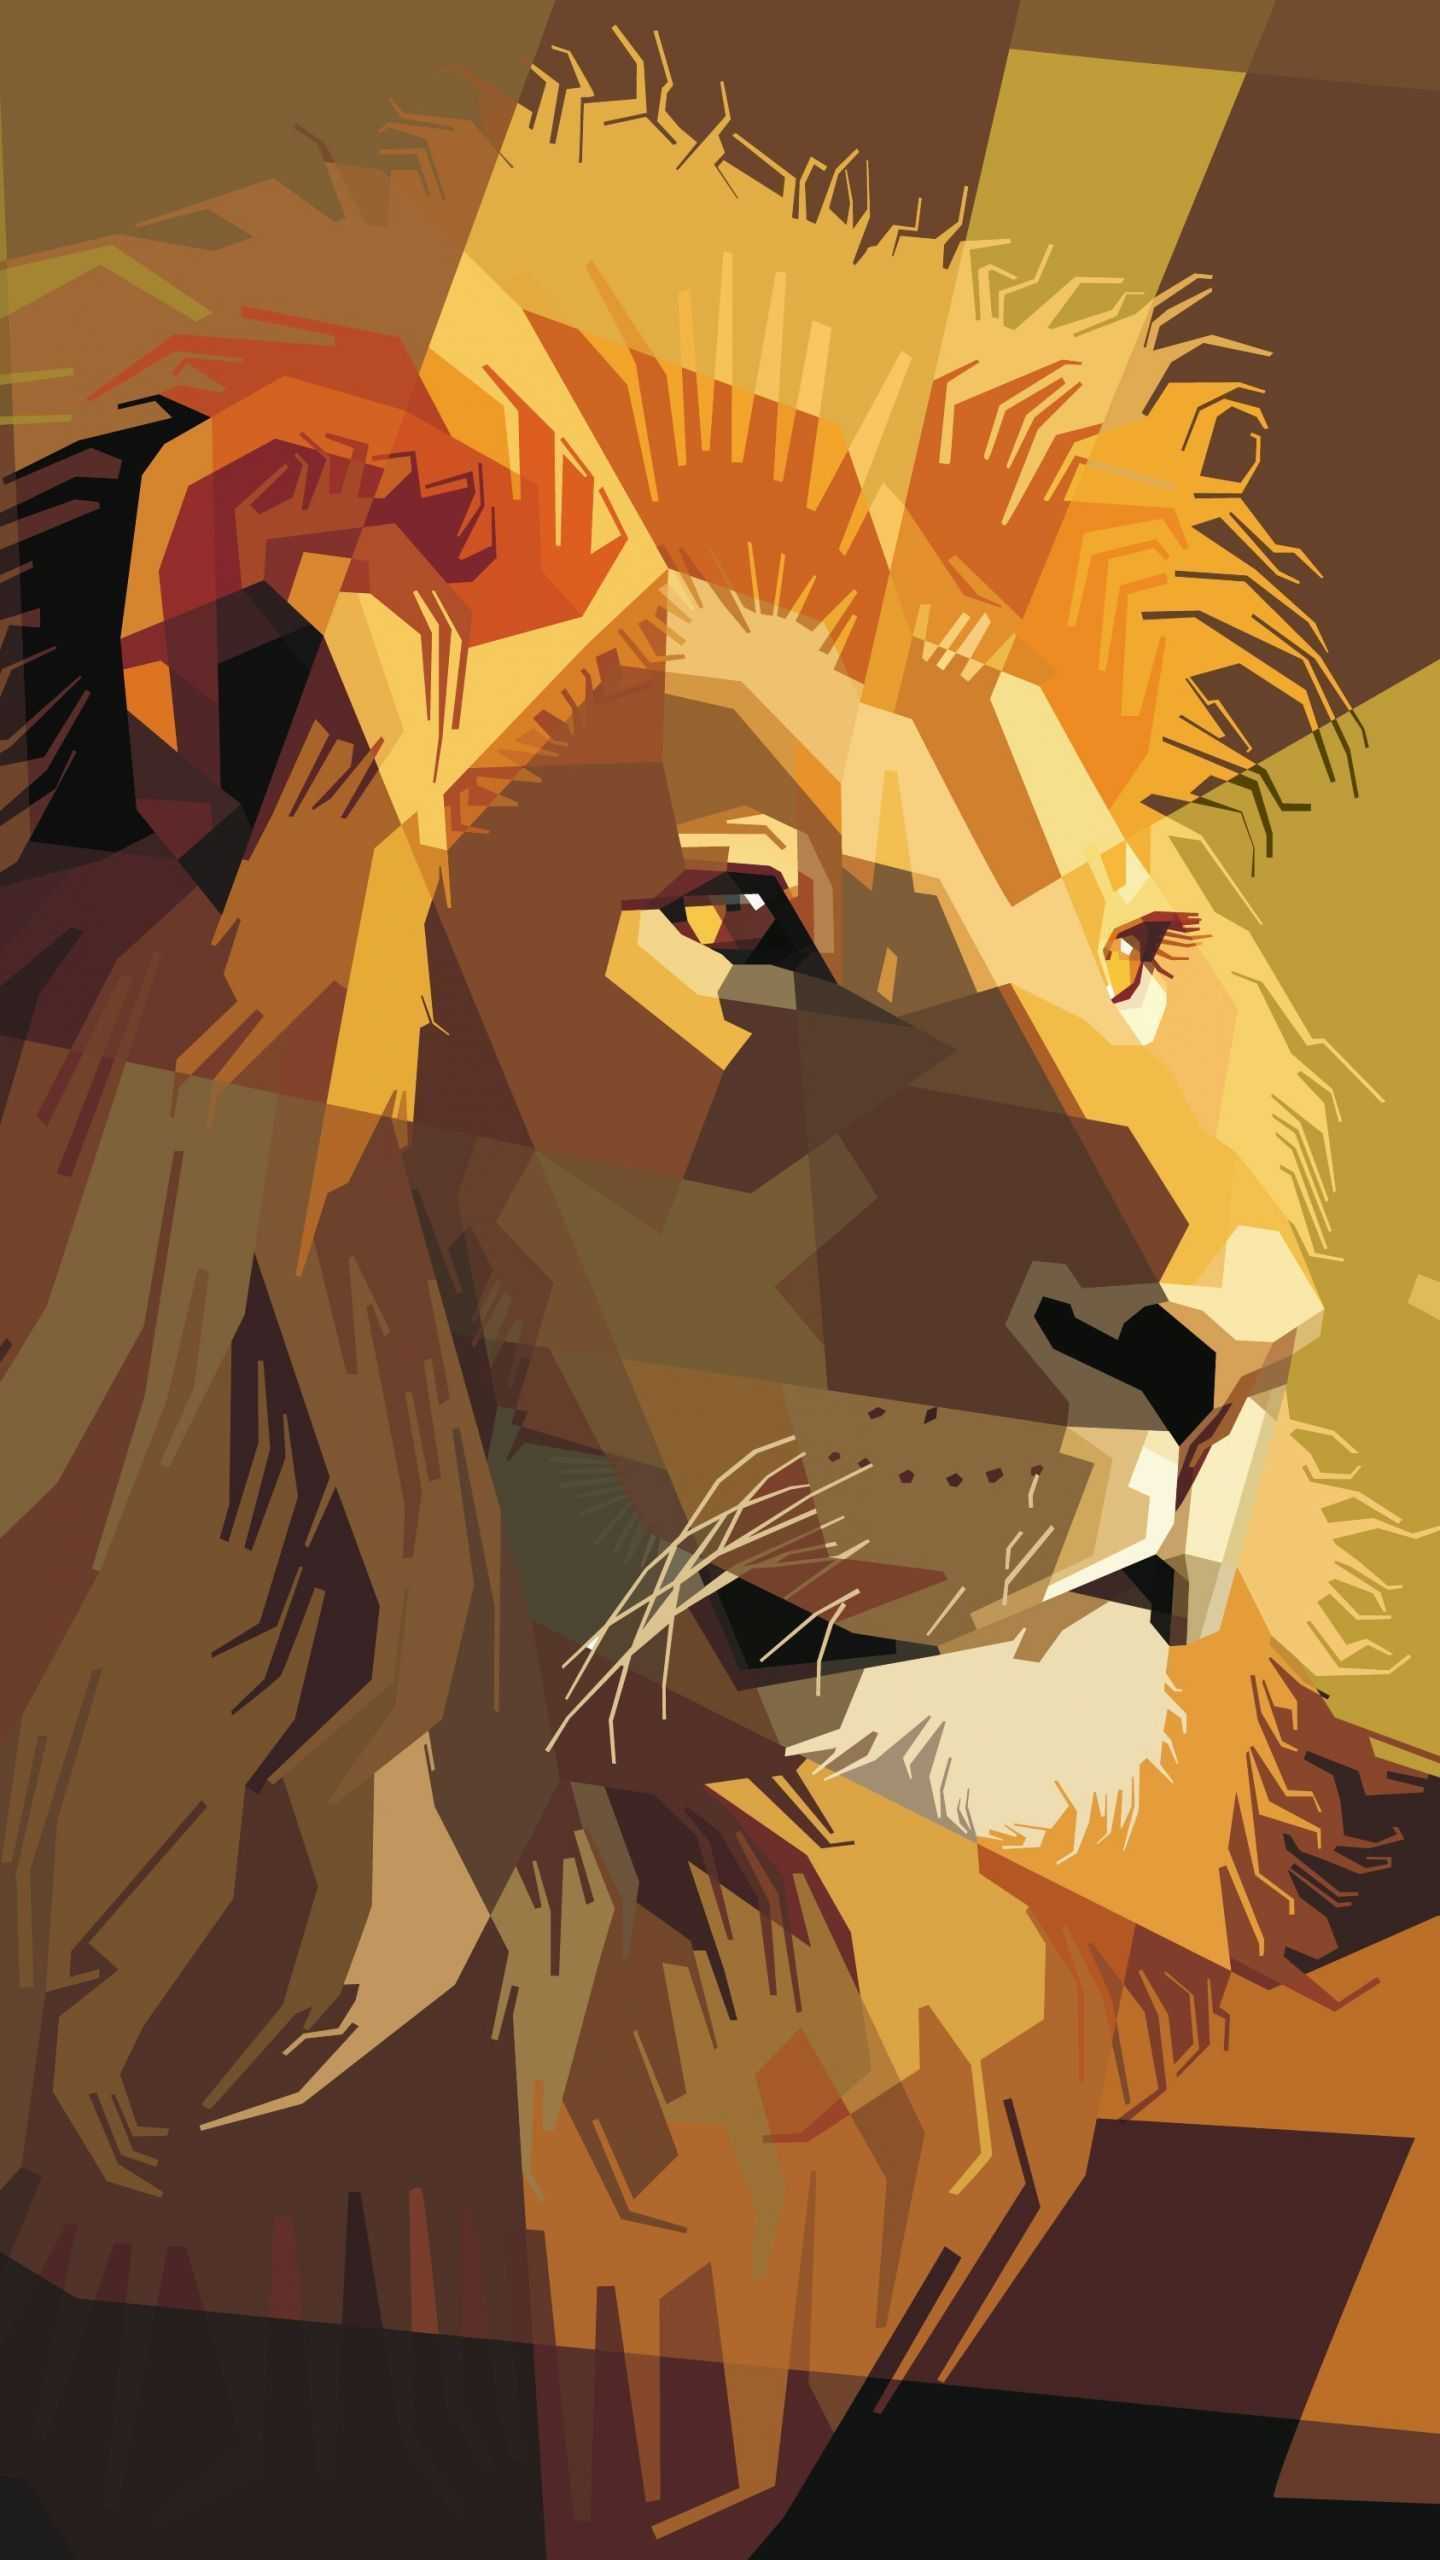 A lion in the style of pop art - Leo, lion